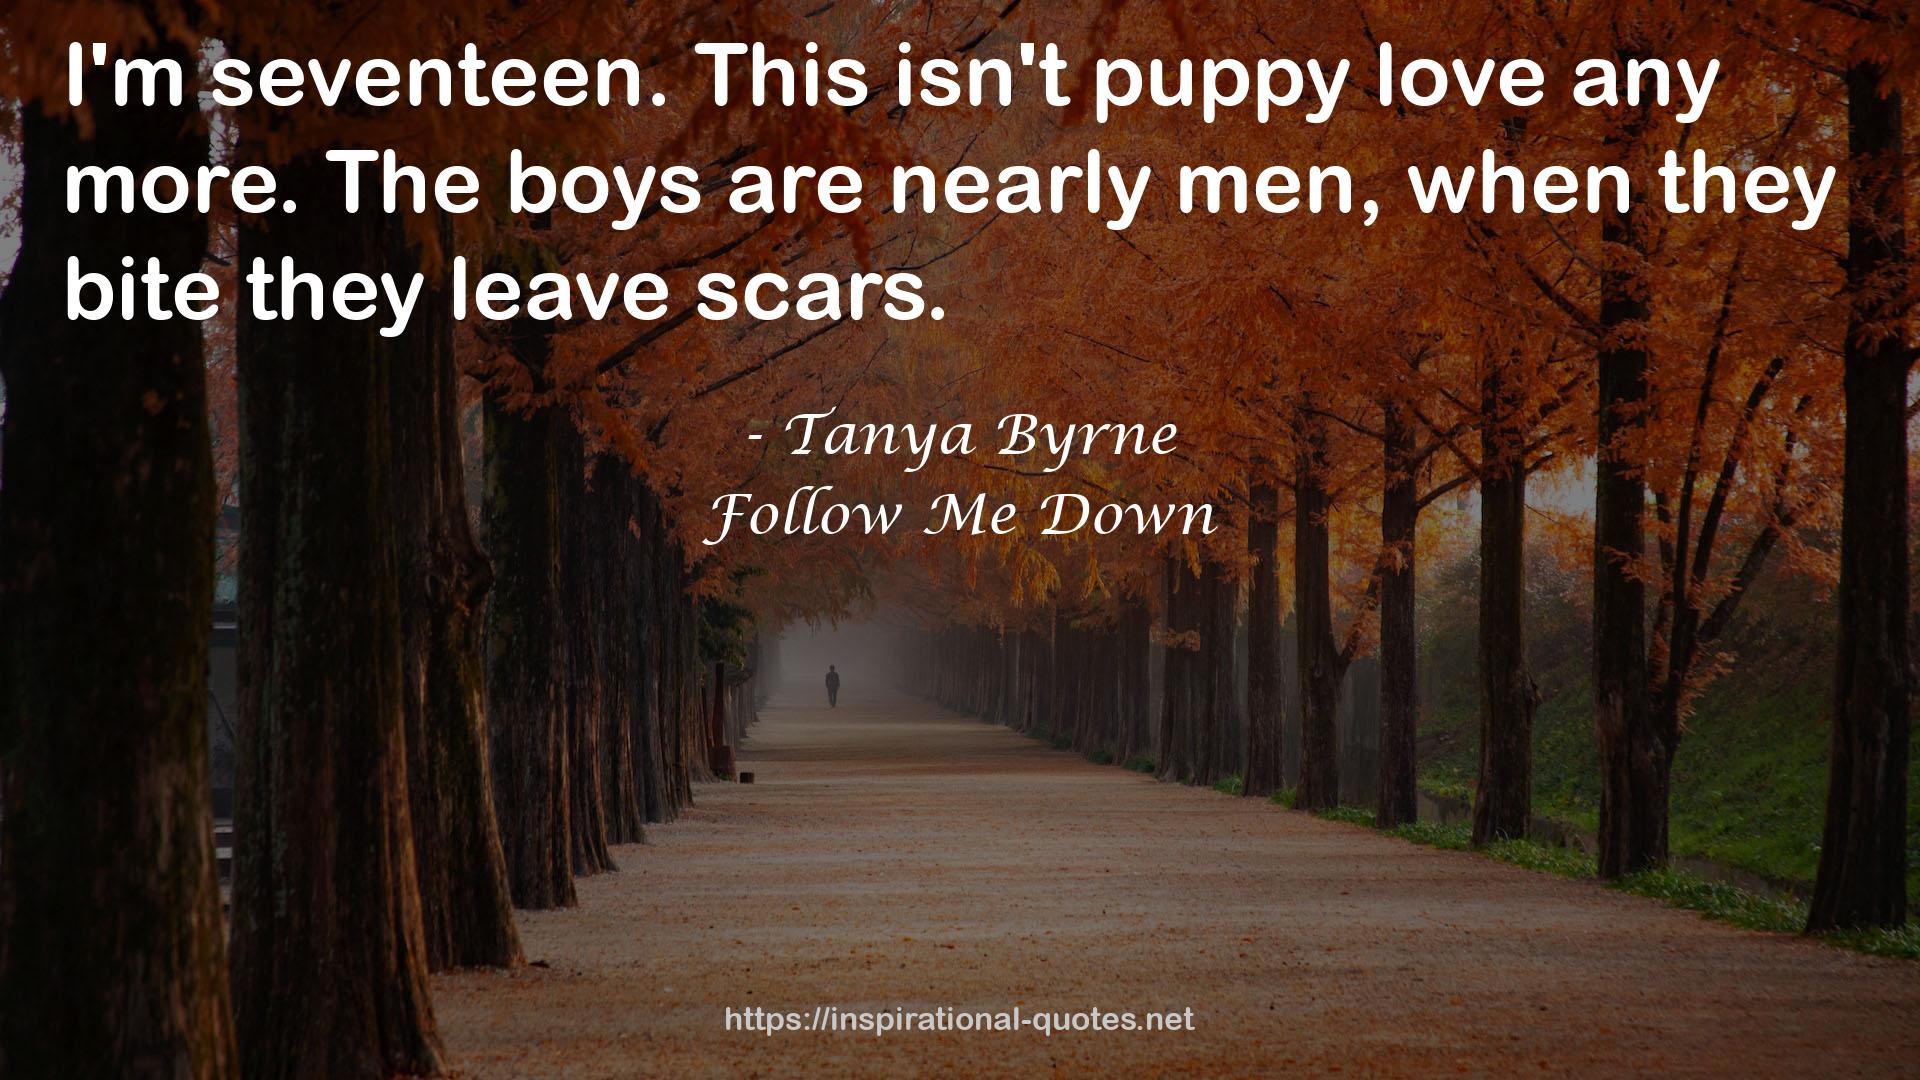 Tanya Byrne QUOTES